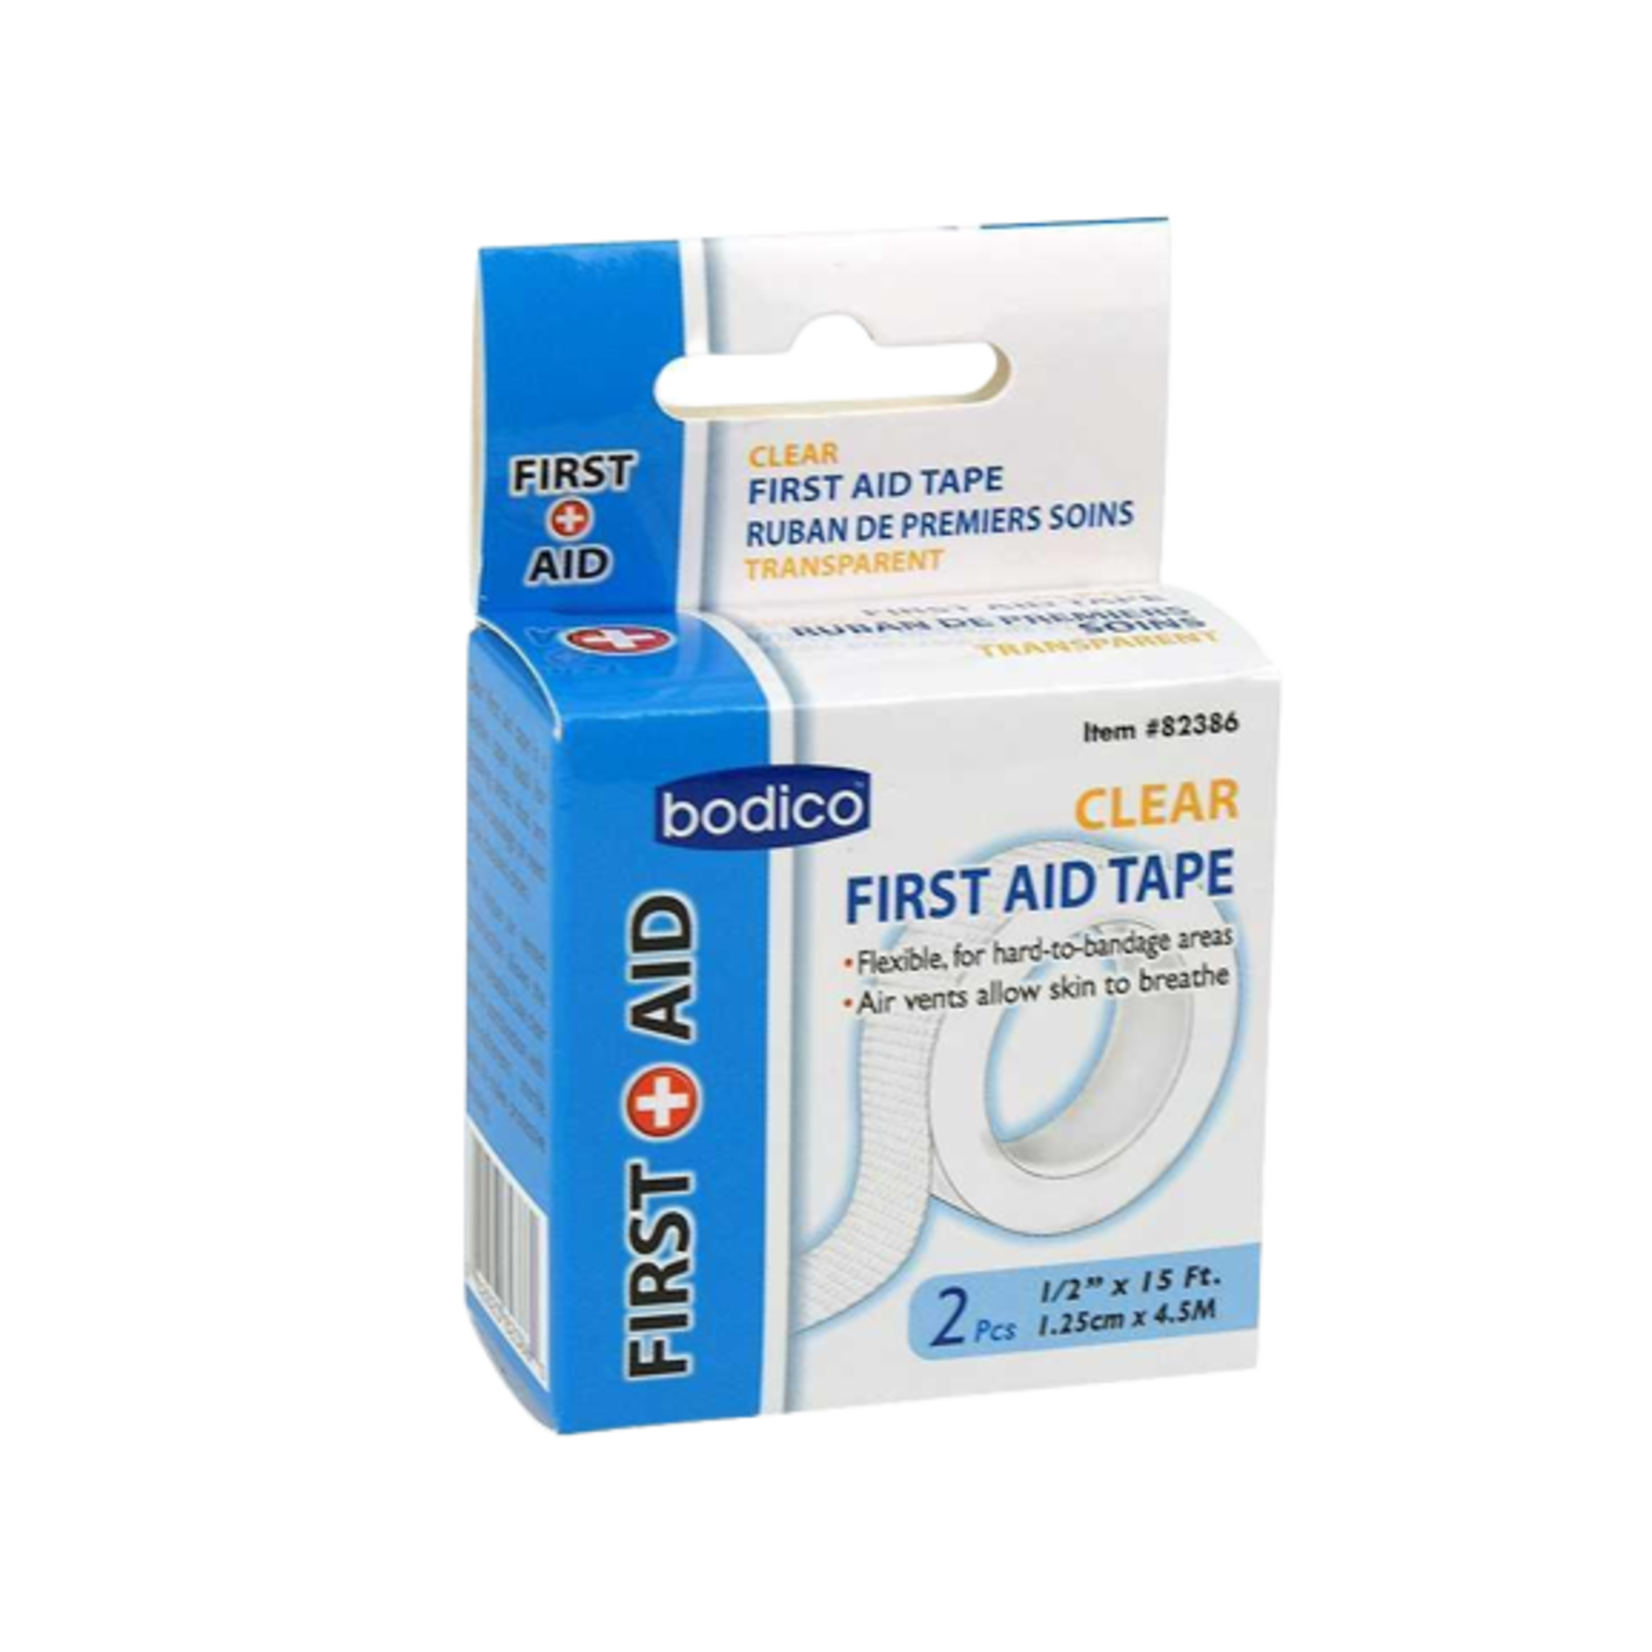 BODICO* CLEAR FIRST AID TAPE - 2 PCS 1/2'' X 15 FT